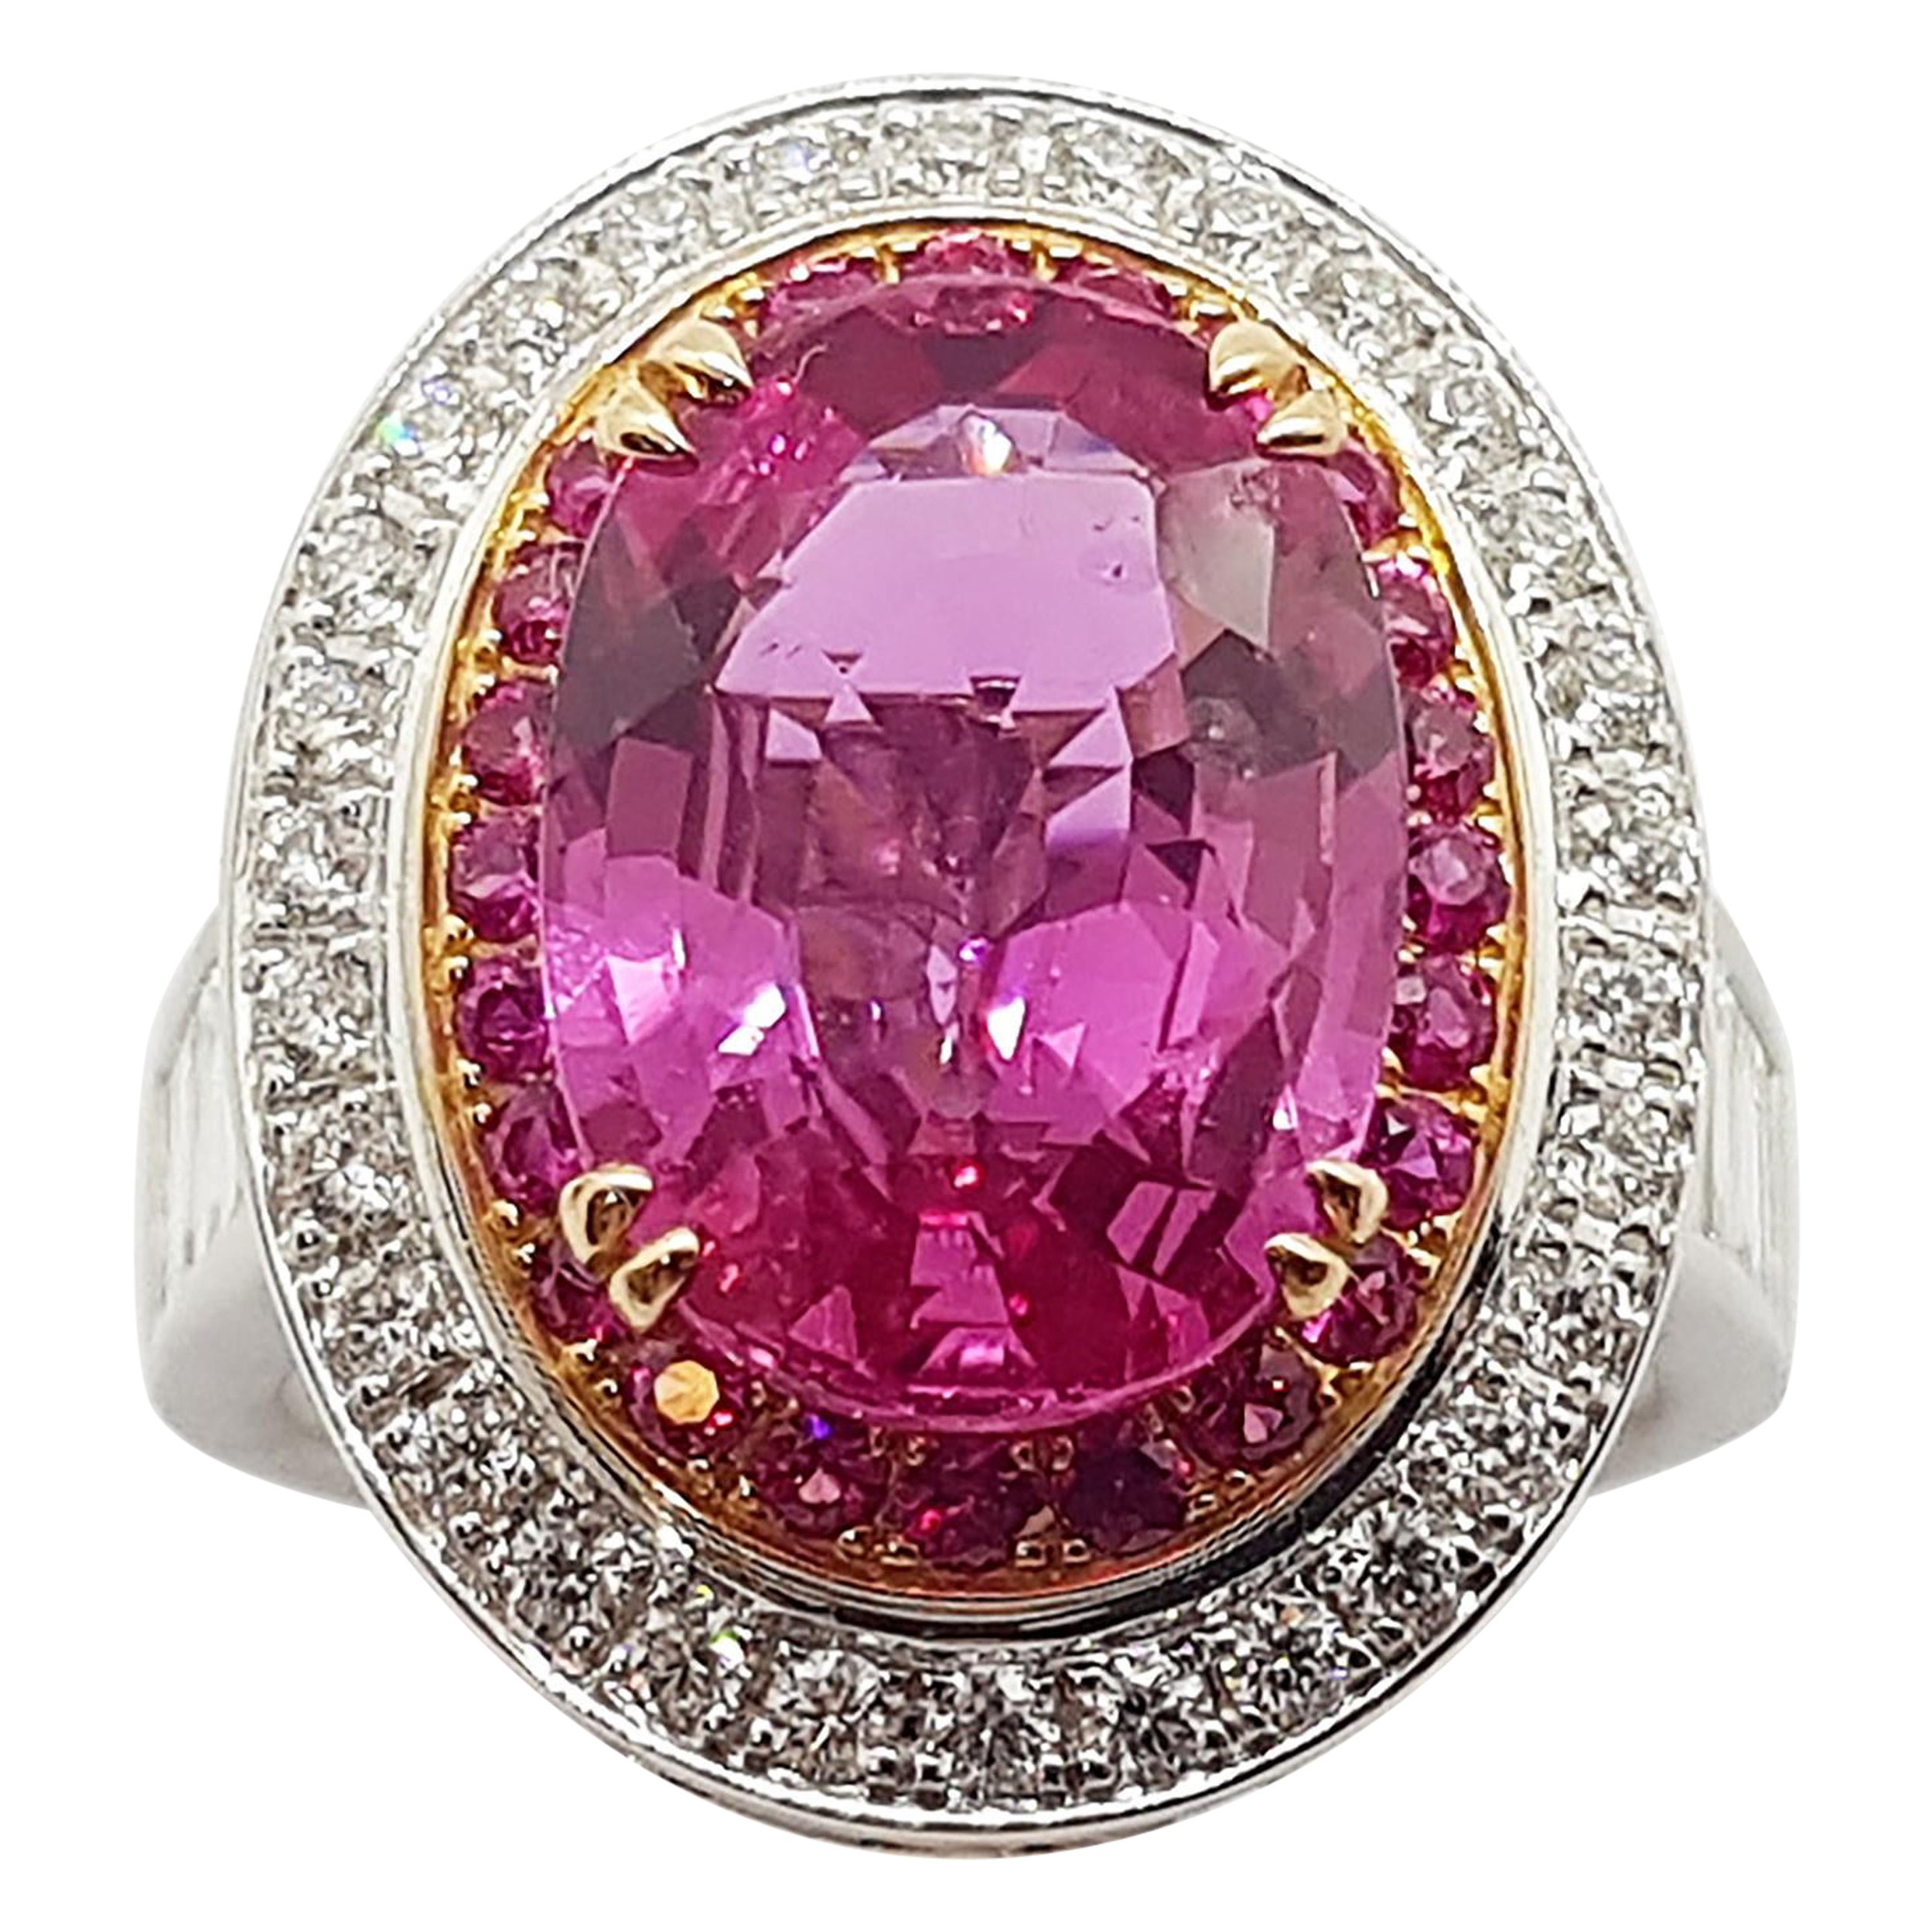 Certified 5 Cts Pink Sapphire with Diamond Ring Set in 18 Karat White Gold